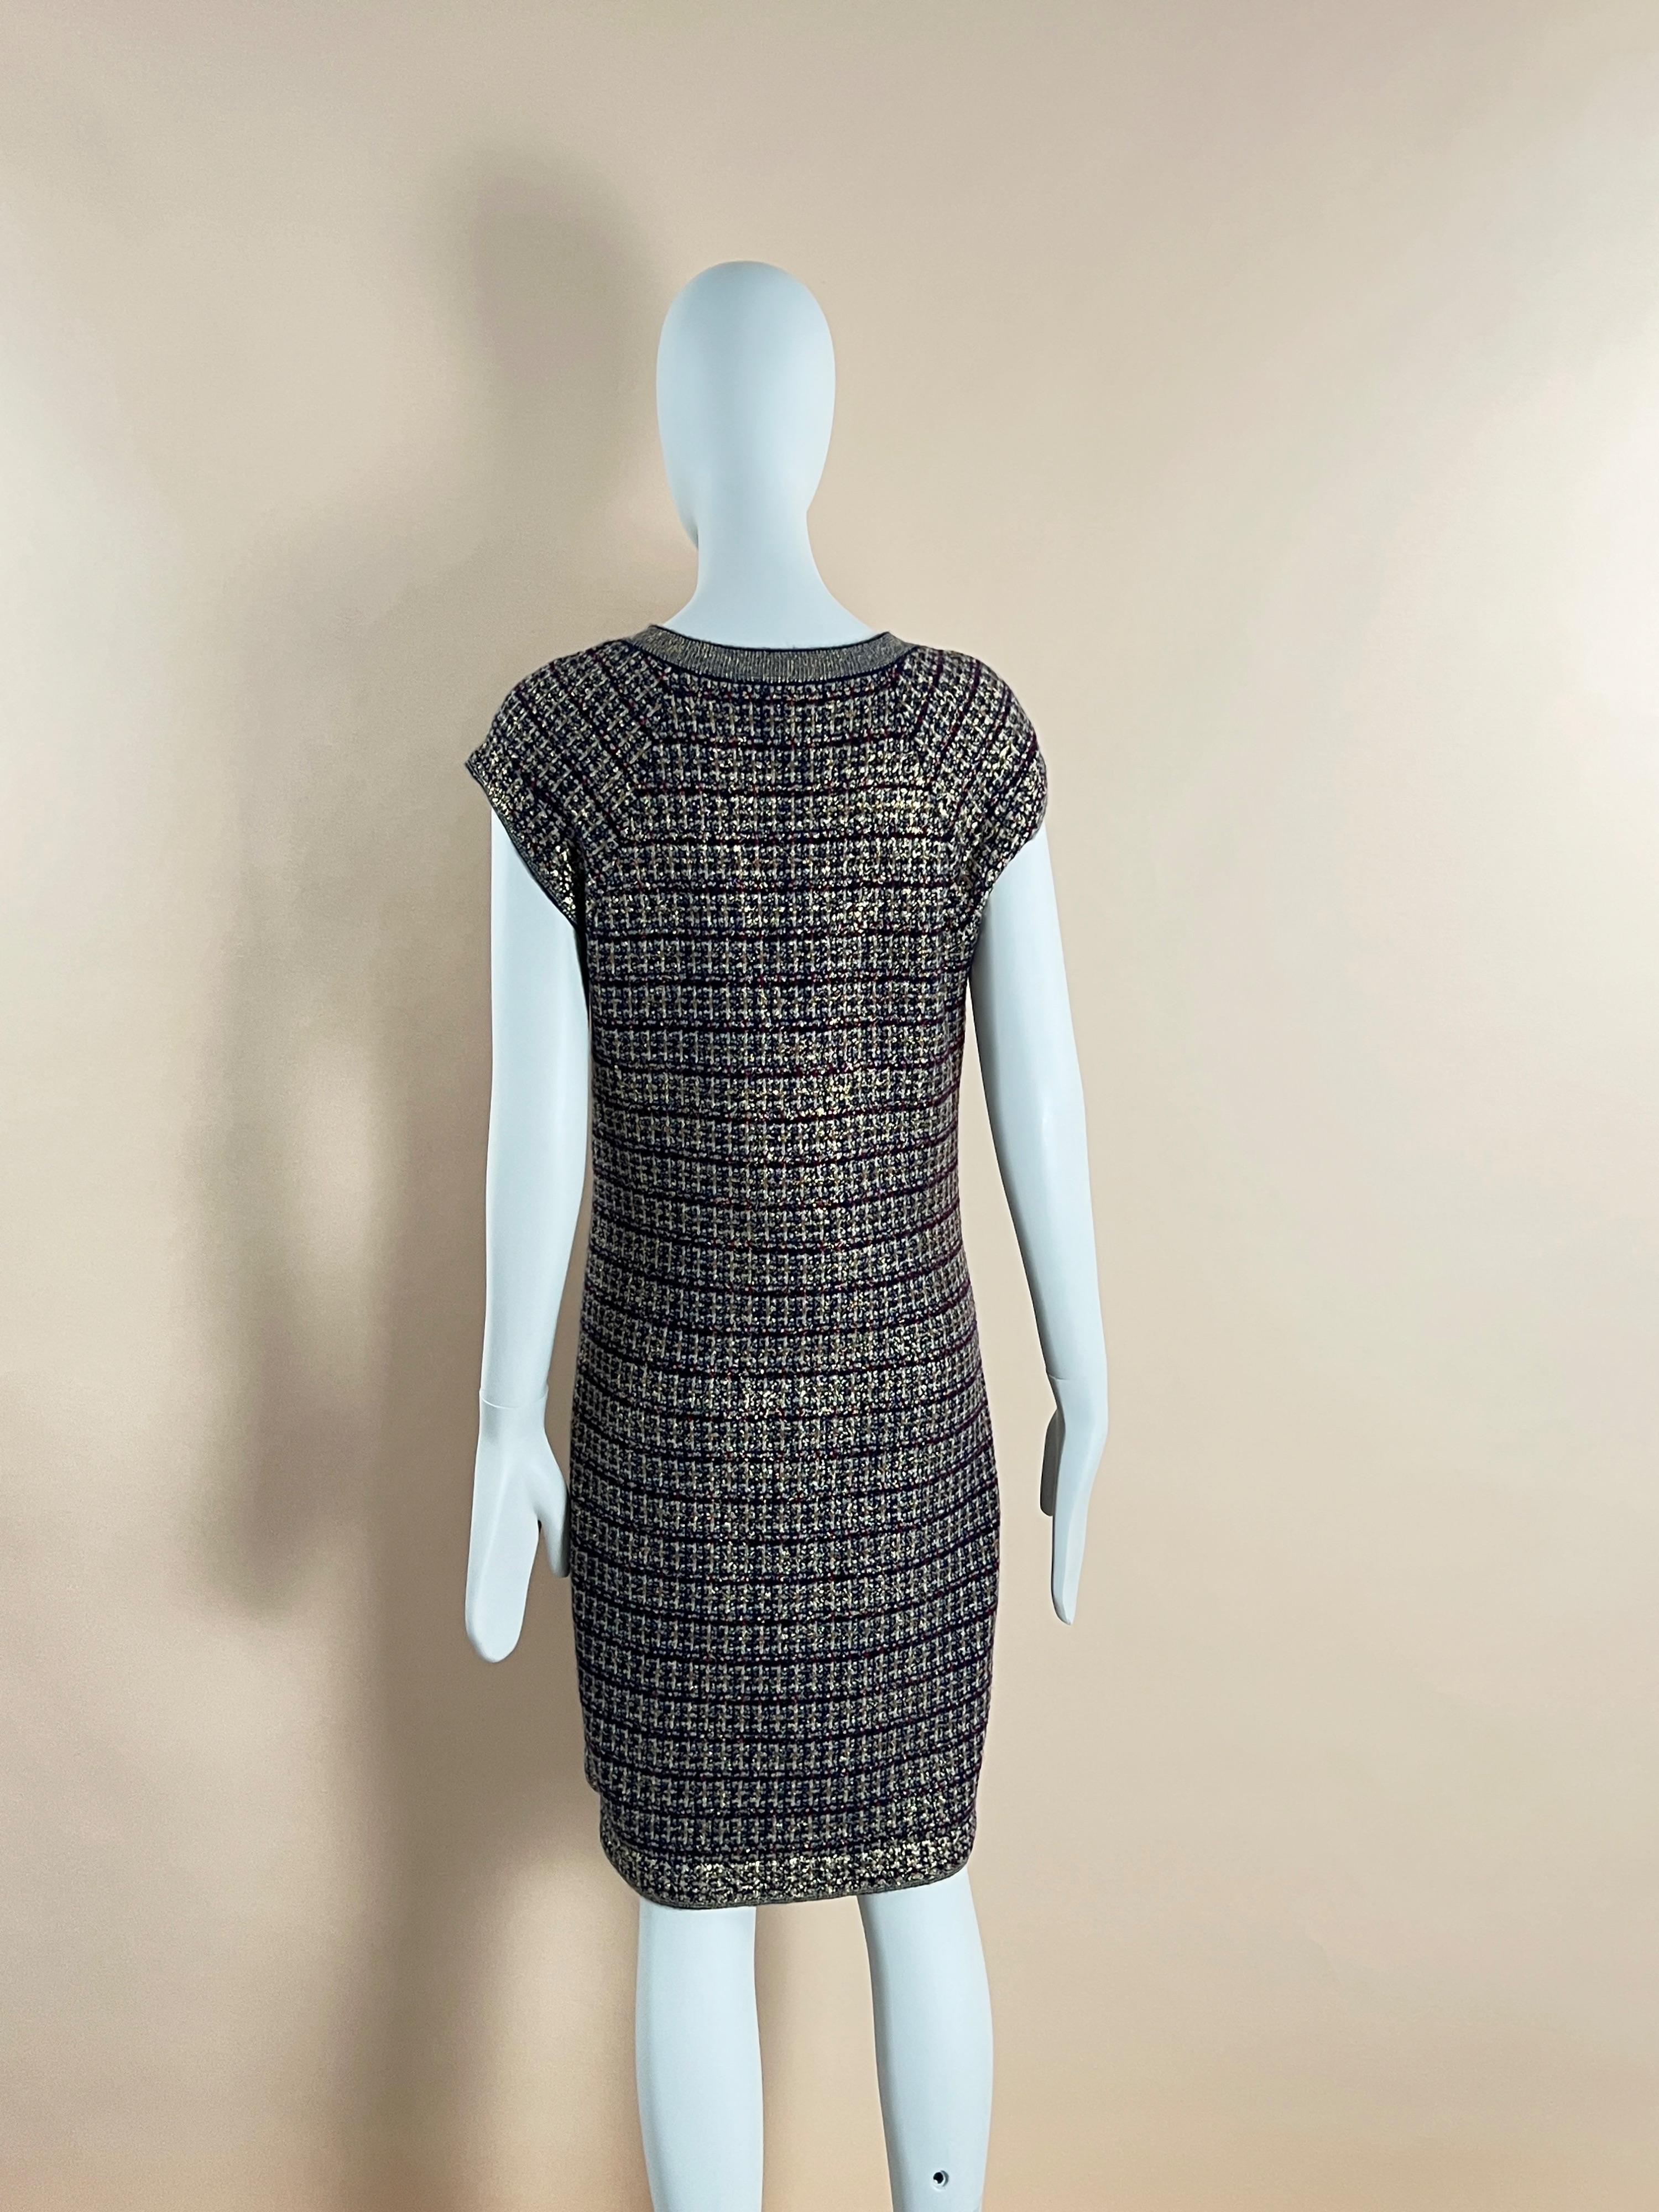 Chanel Byzance Collection Jewel Buttons Dress 1